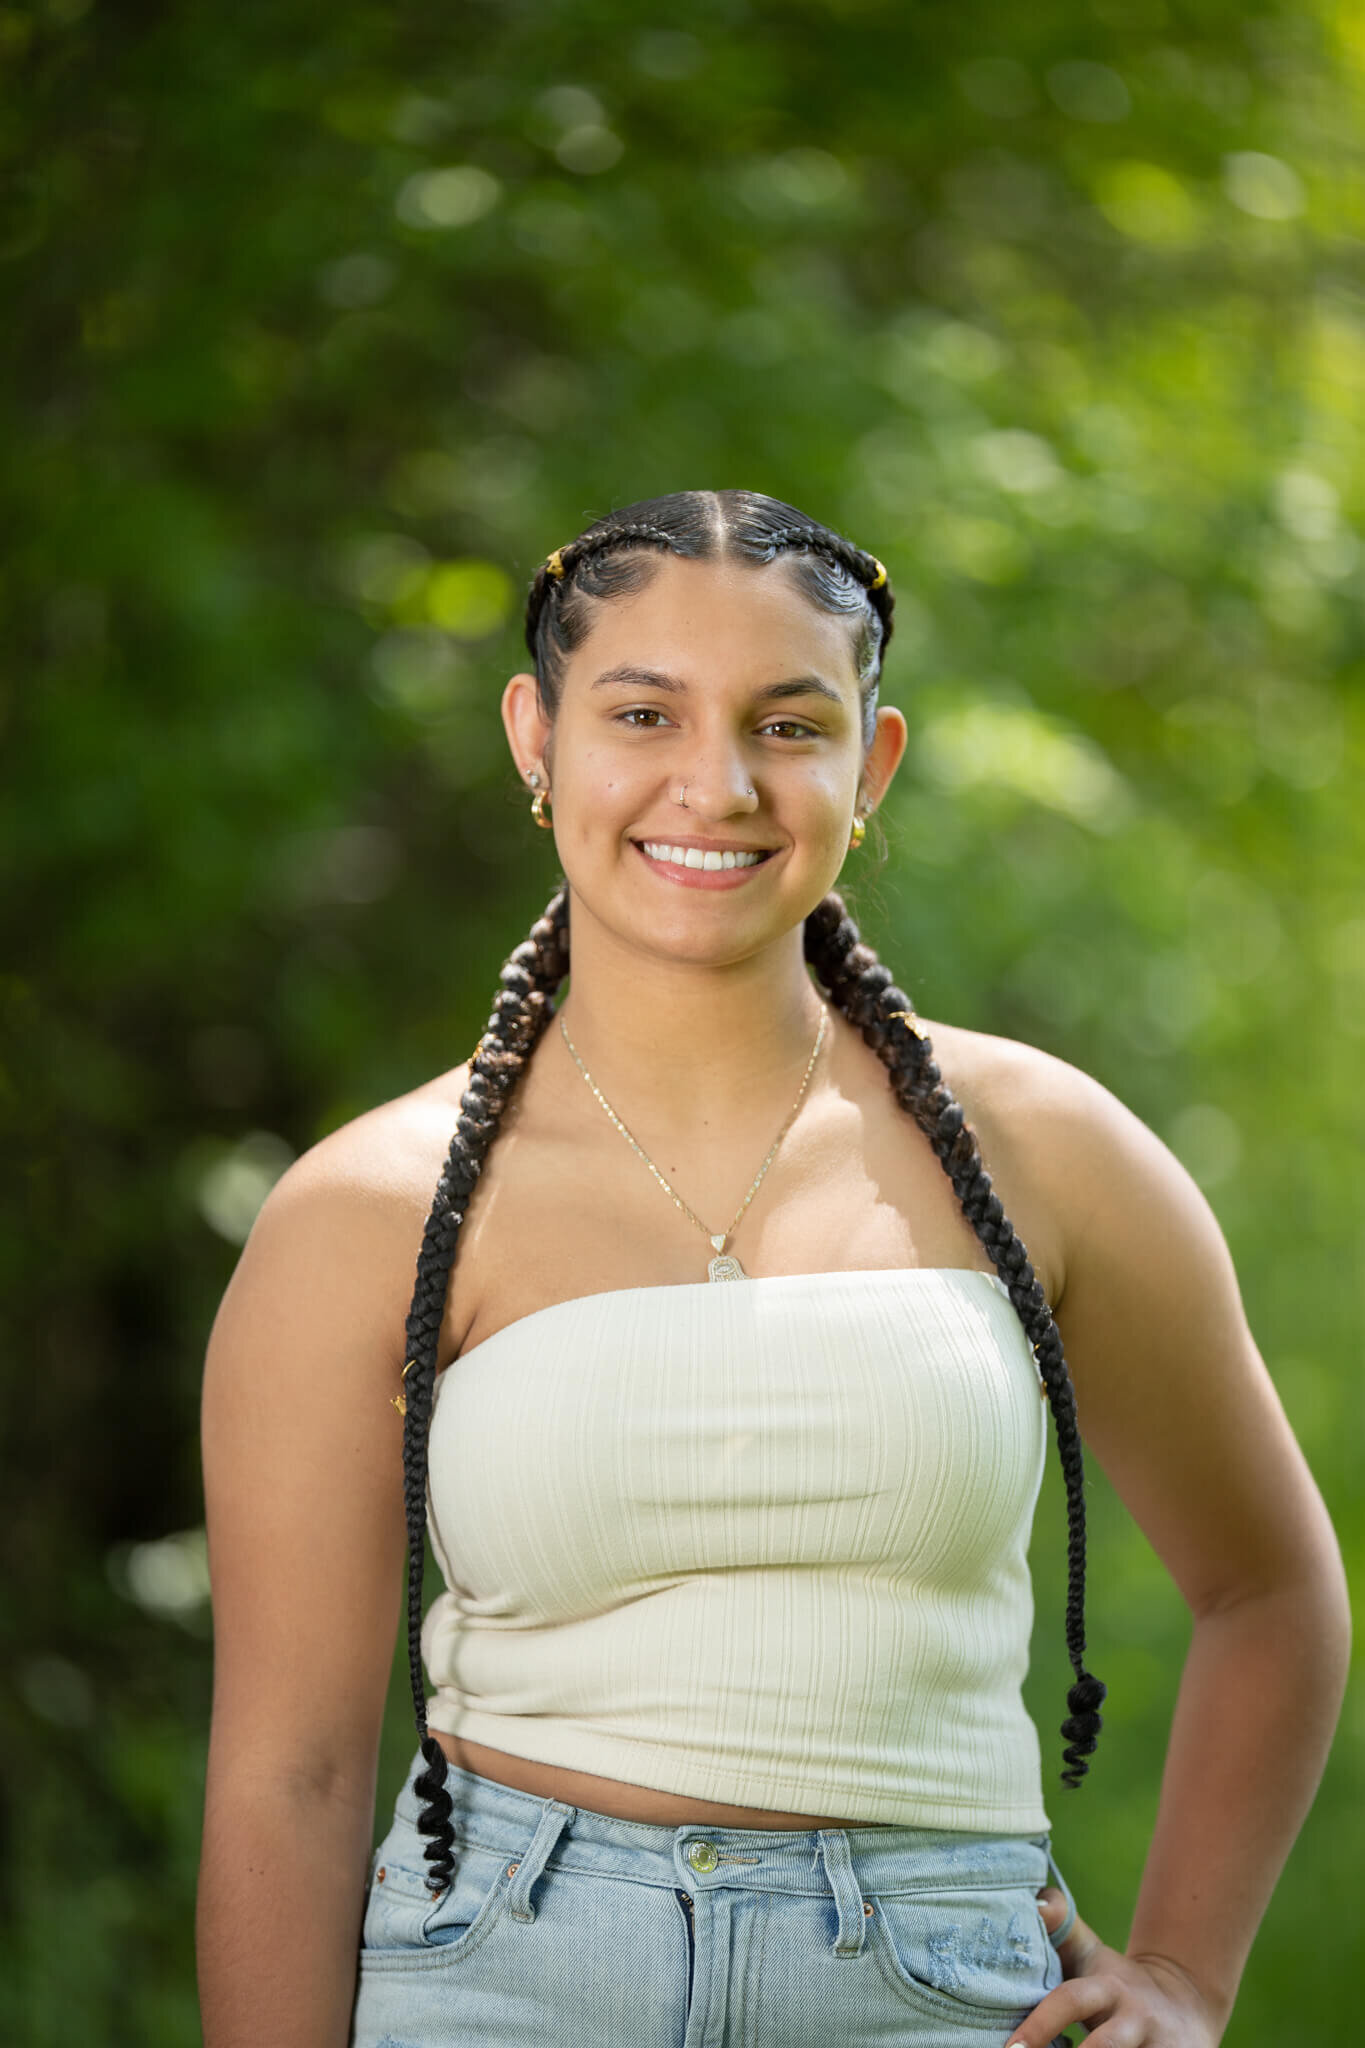 High school senior portrait photography in Clinton MA  of female in a white top smiling at the camera with a green and yellow background and one hand on her hip while standing